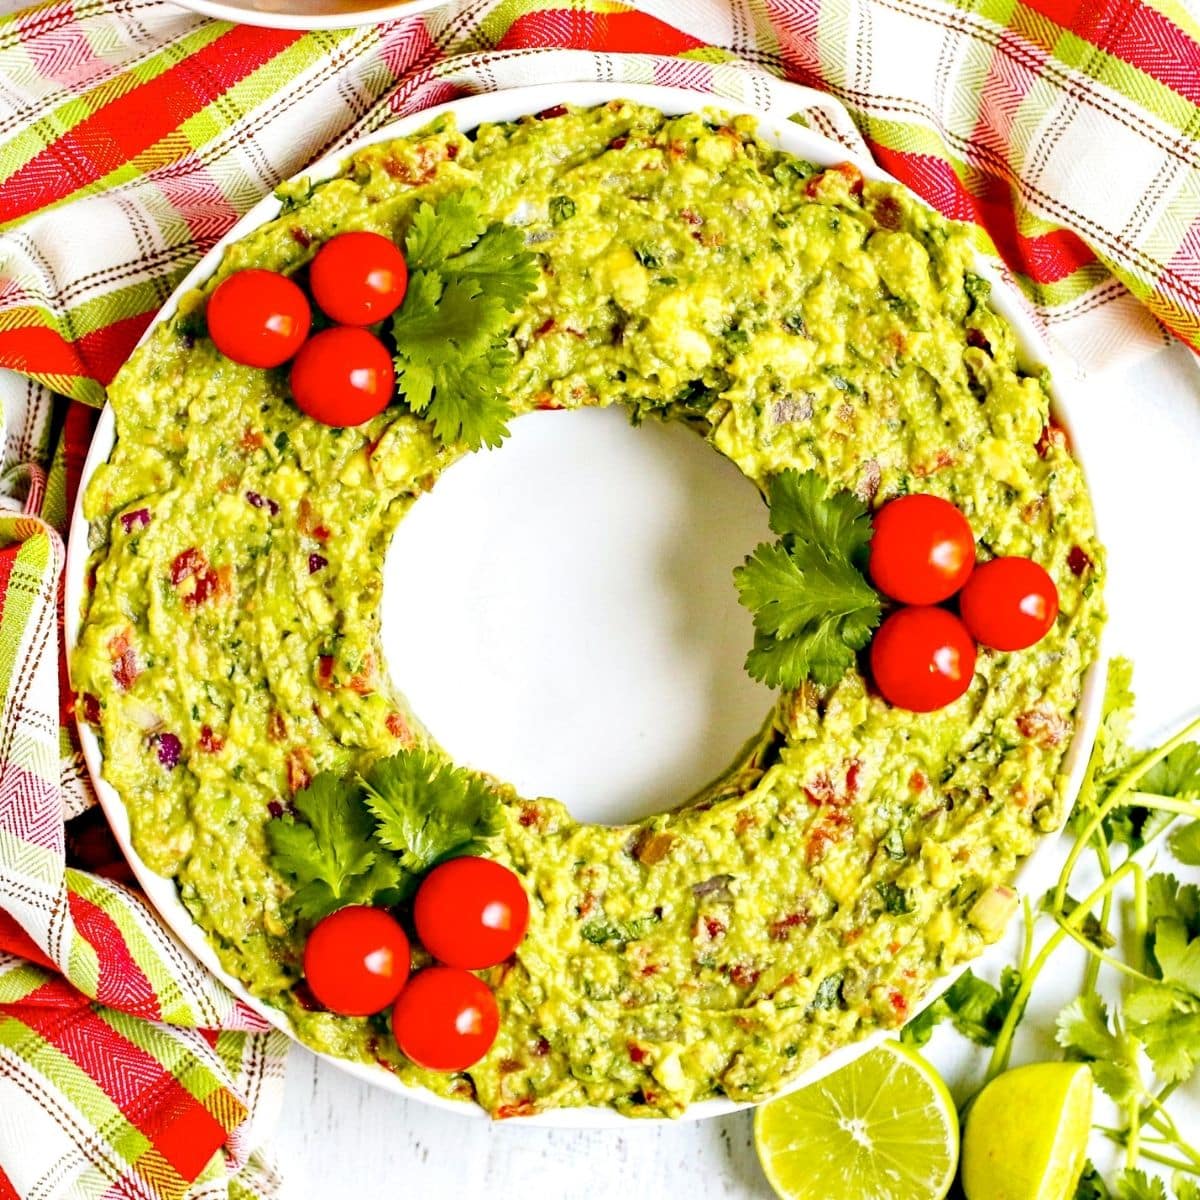 Guacamole garnished with cherry tomatoes and fresh cilantro leaves.